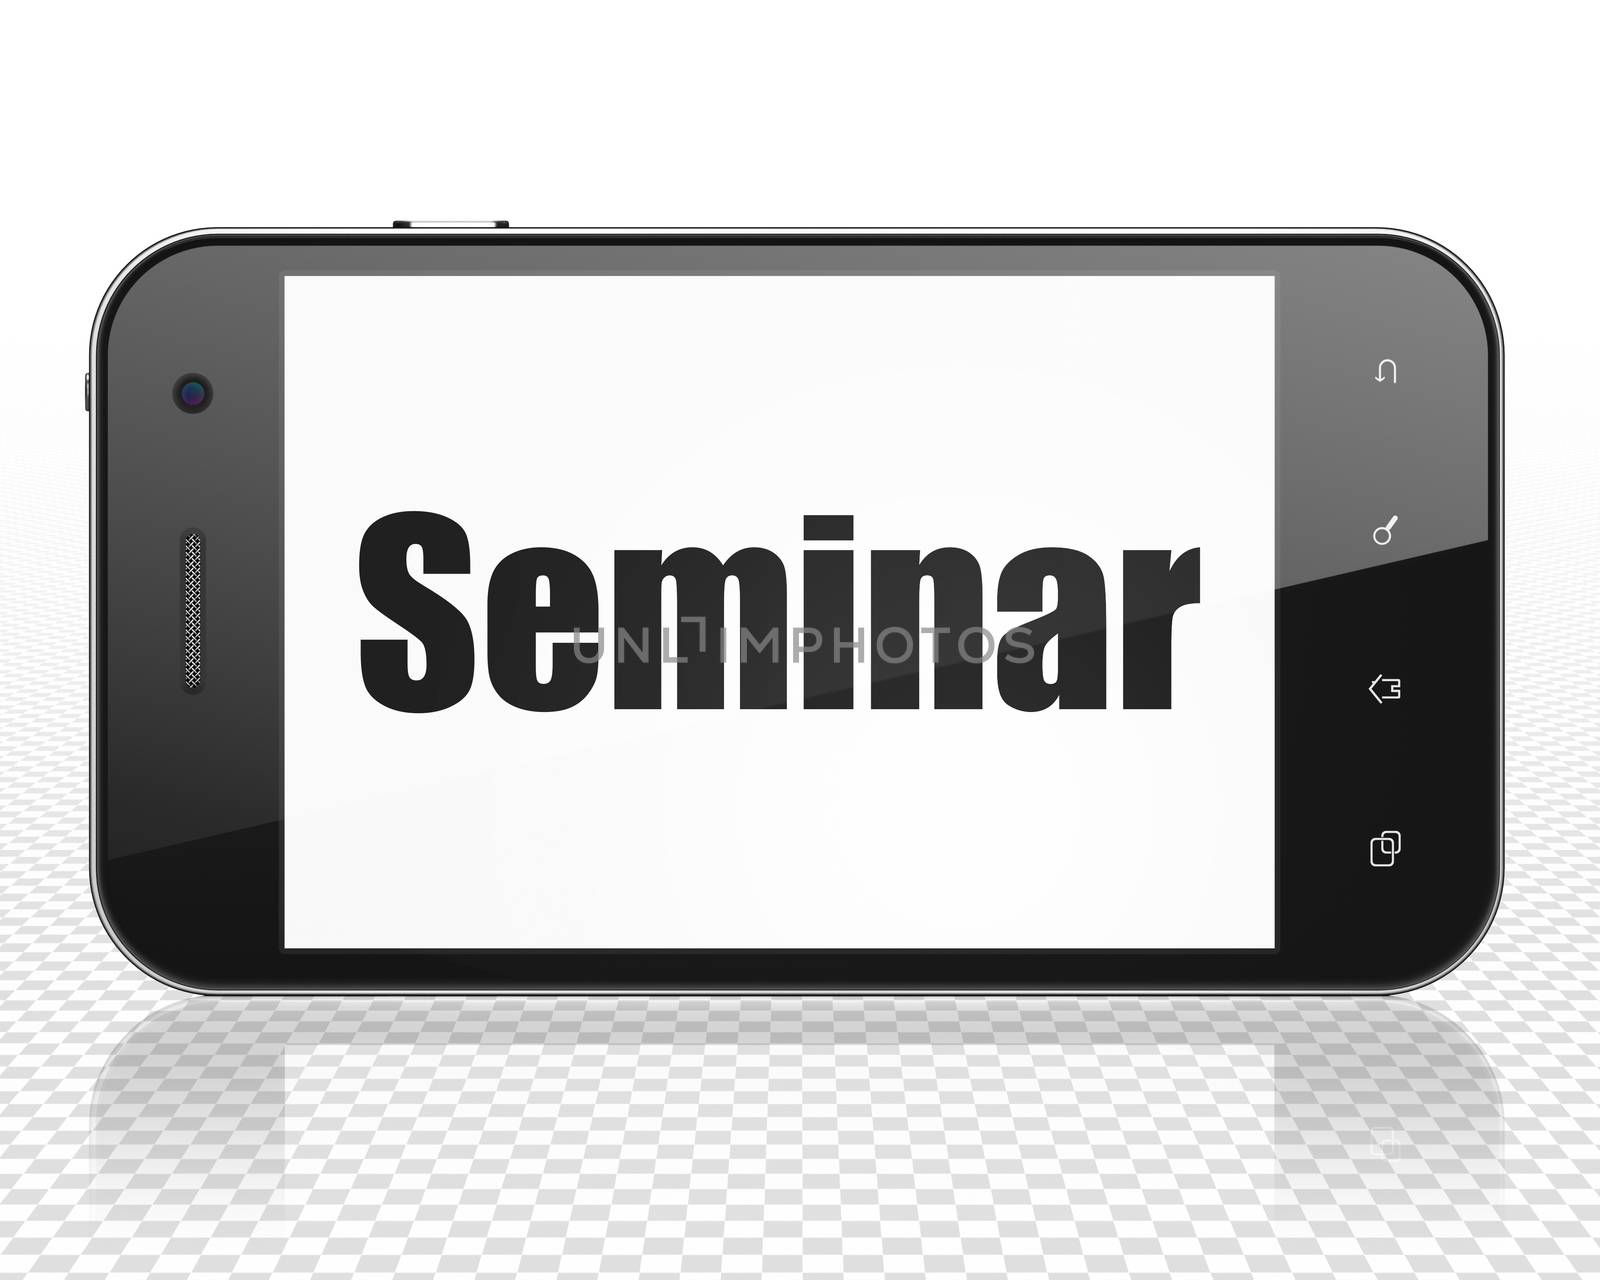 Studying concept: Smartphone with black text Seminar on display, 3D rendering